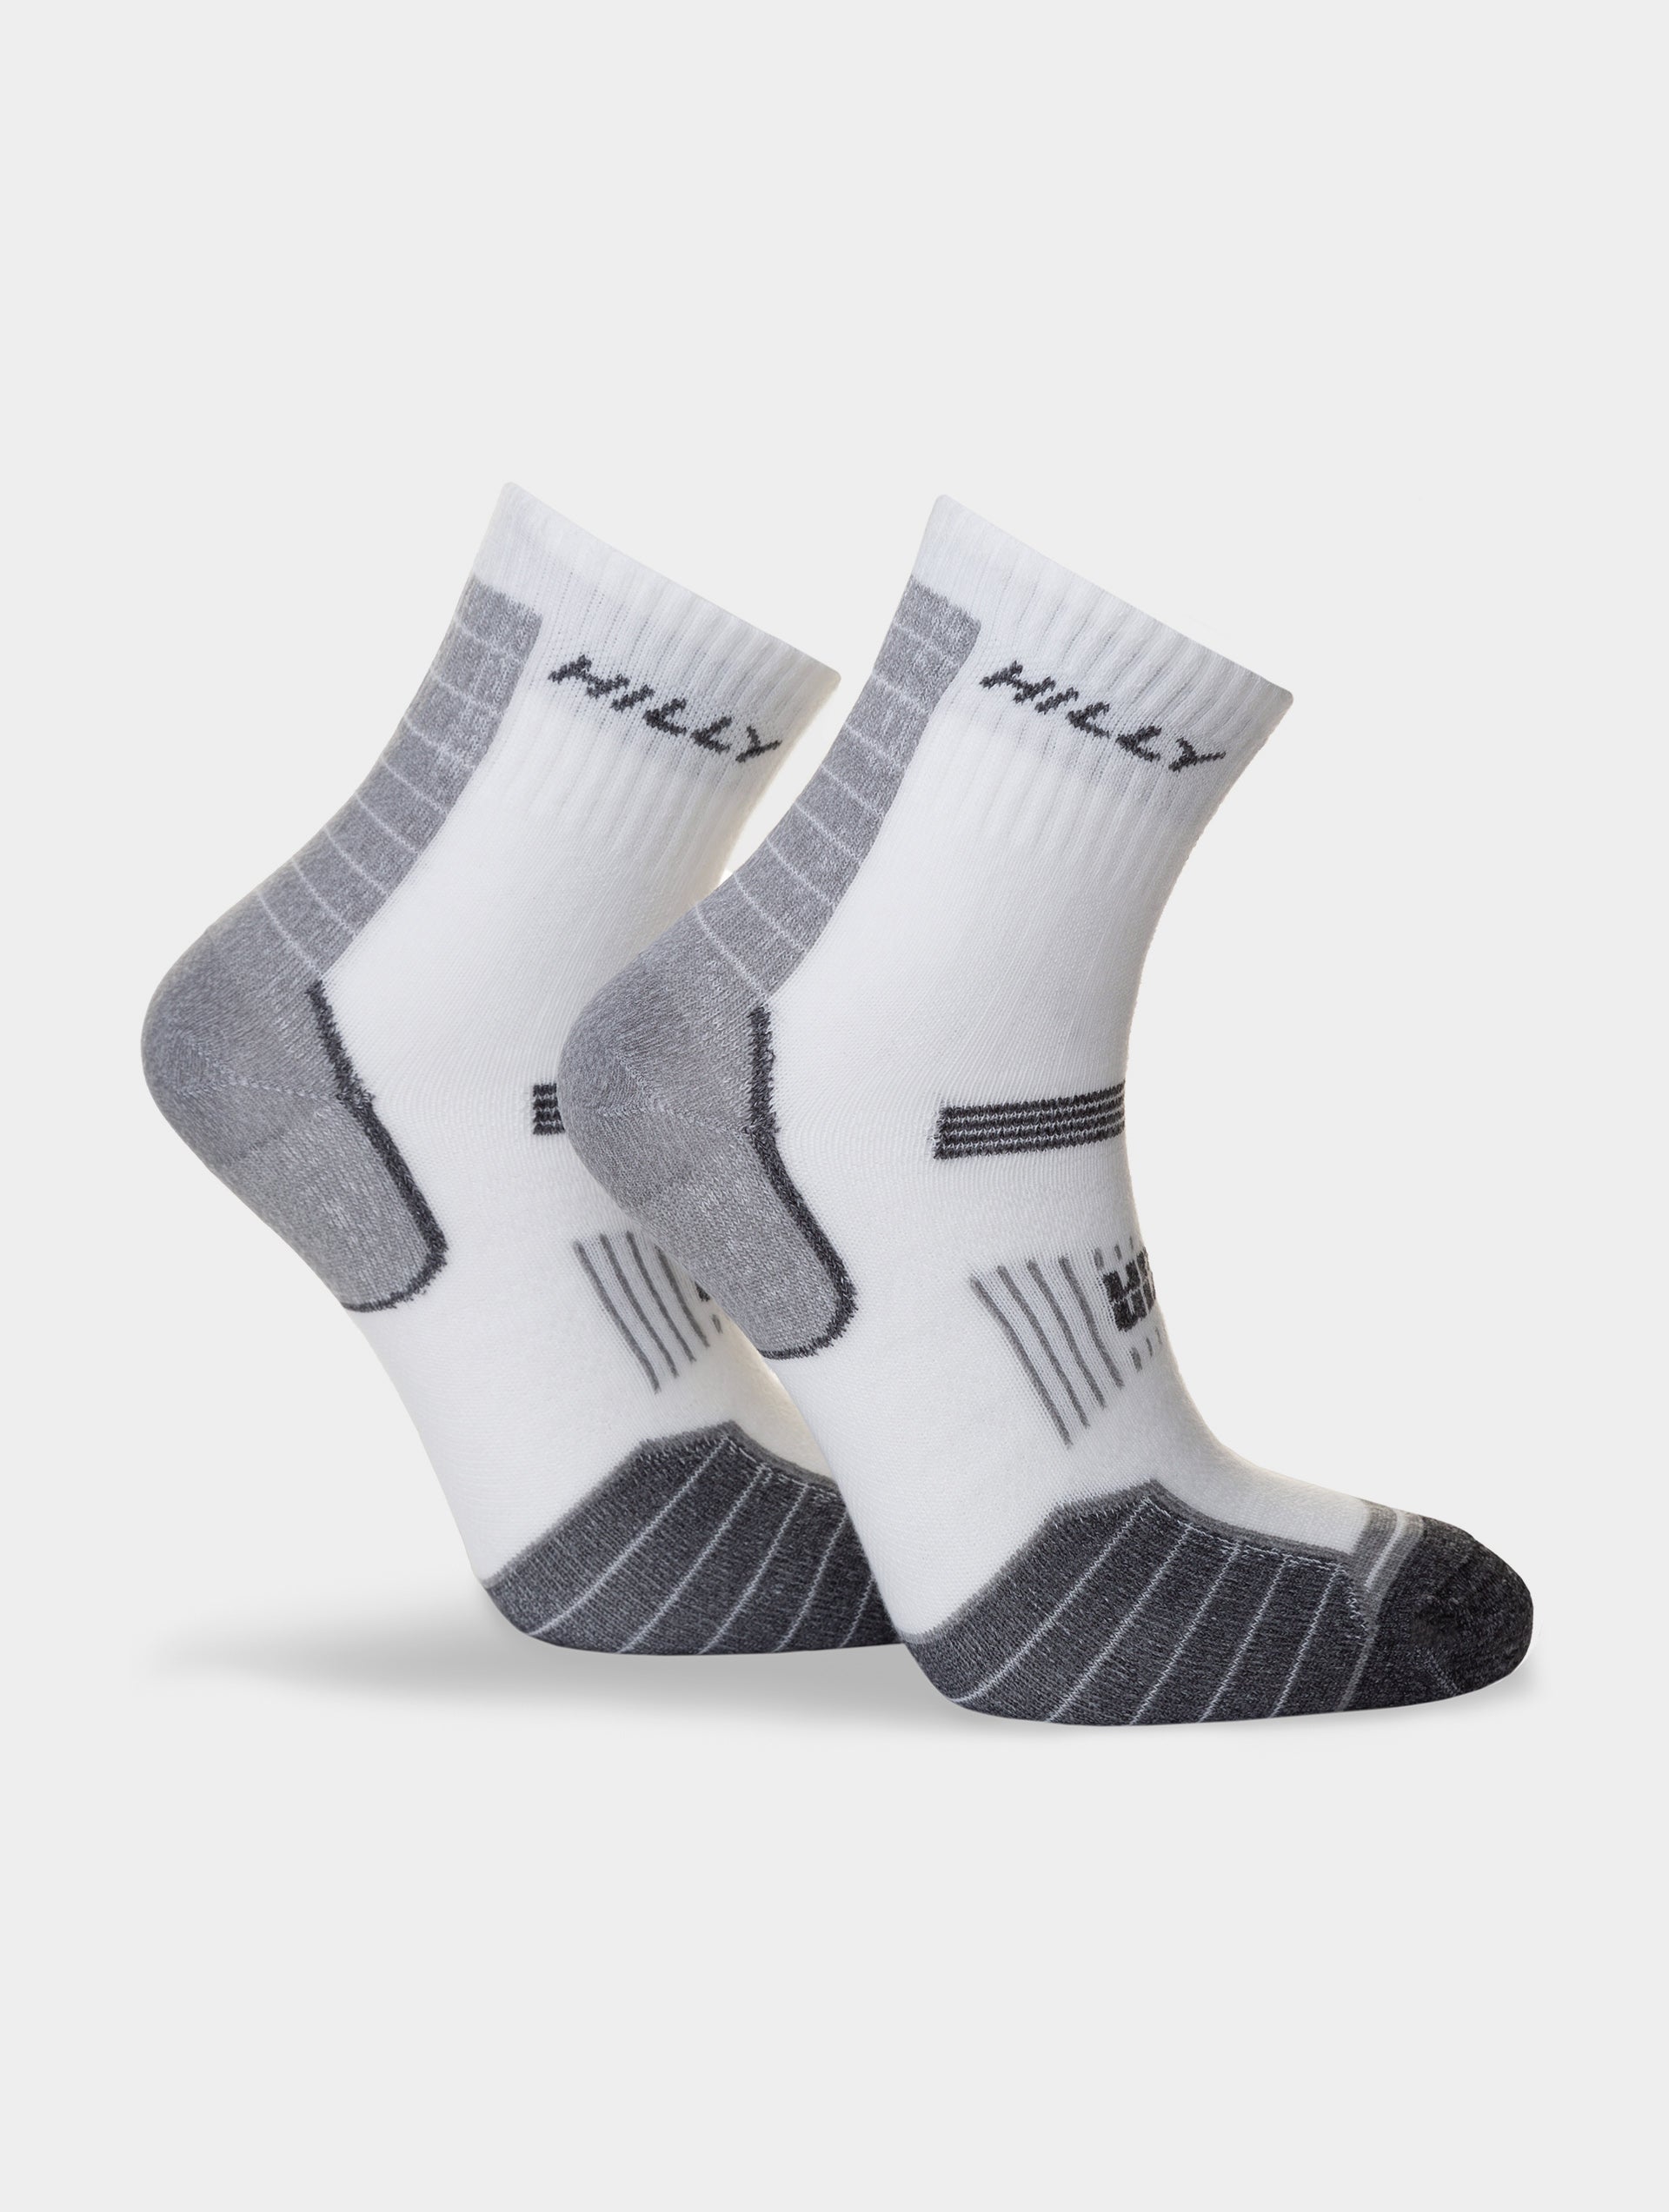 🥇 Calcetines Antiampollas – Trekking – Running – Mujer – TwinSkin Socklet  - Hilly - Run Store Chile